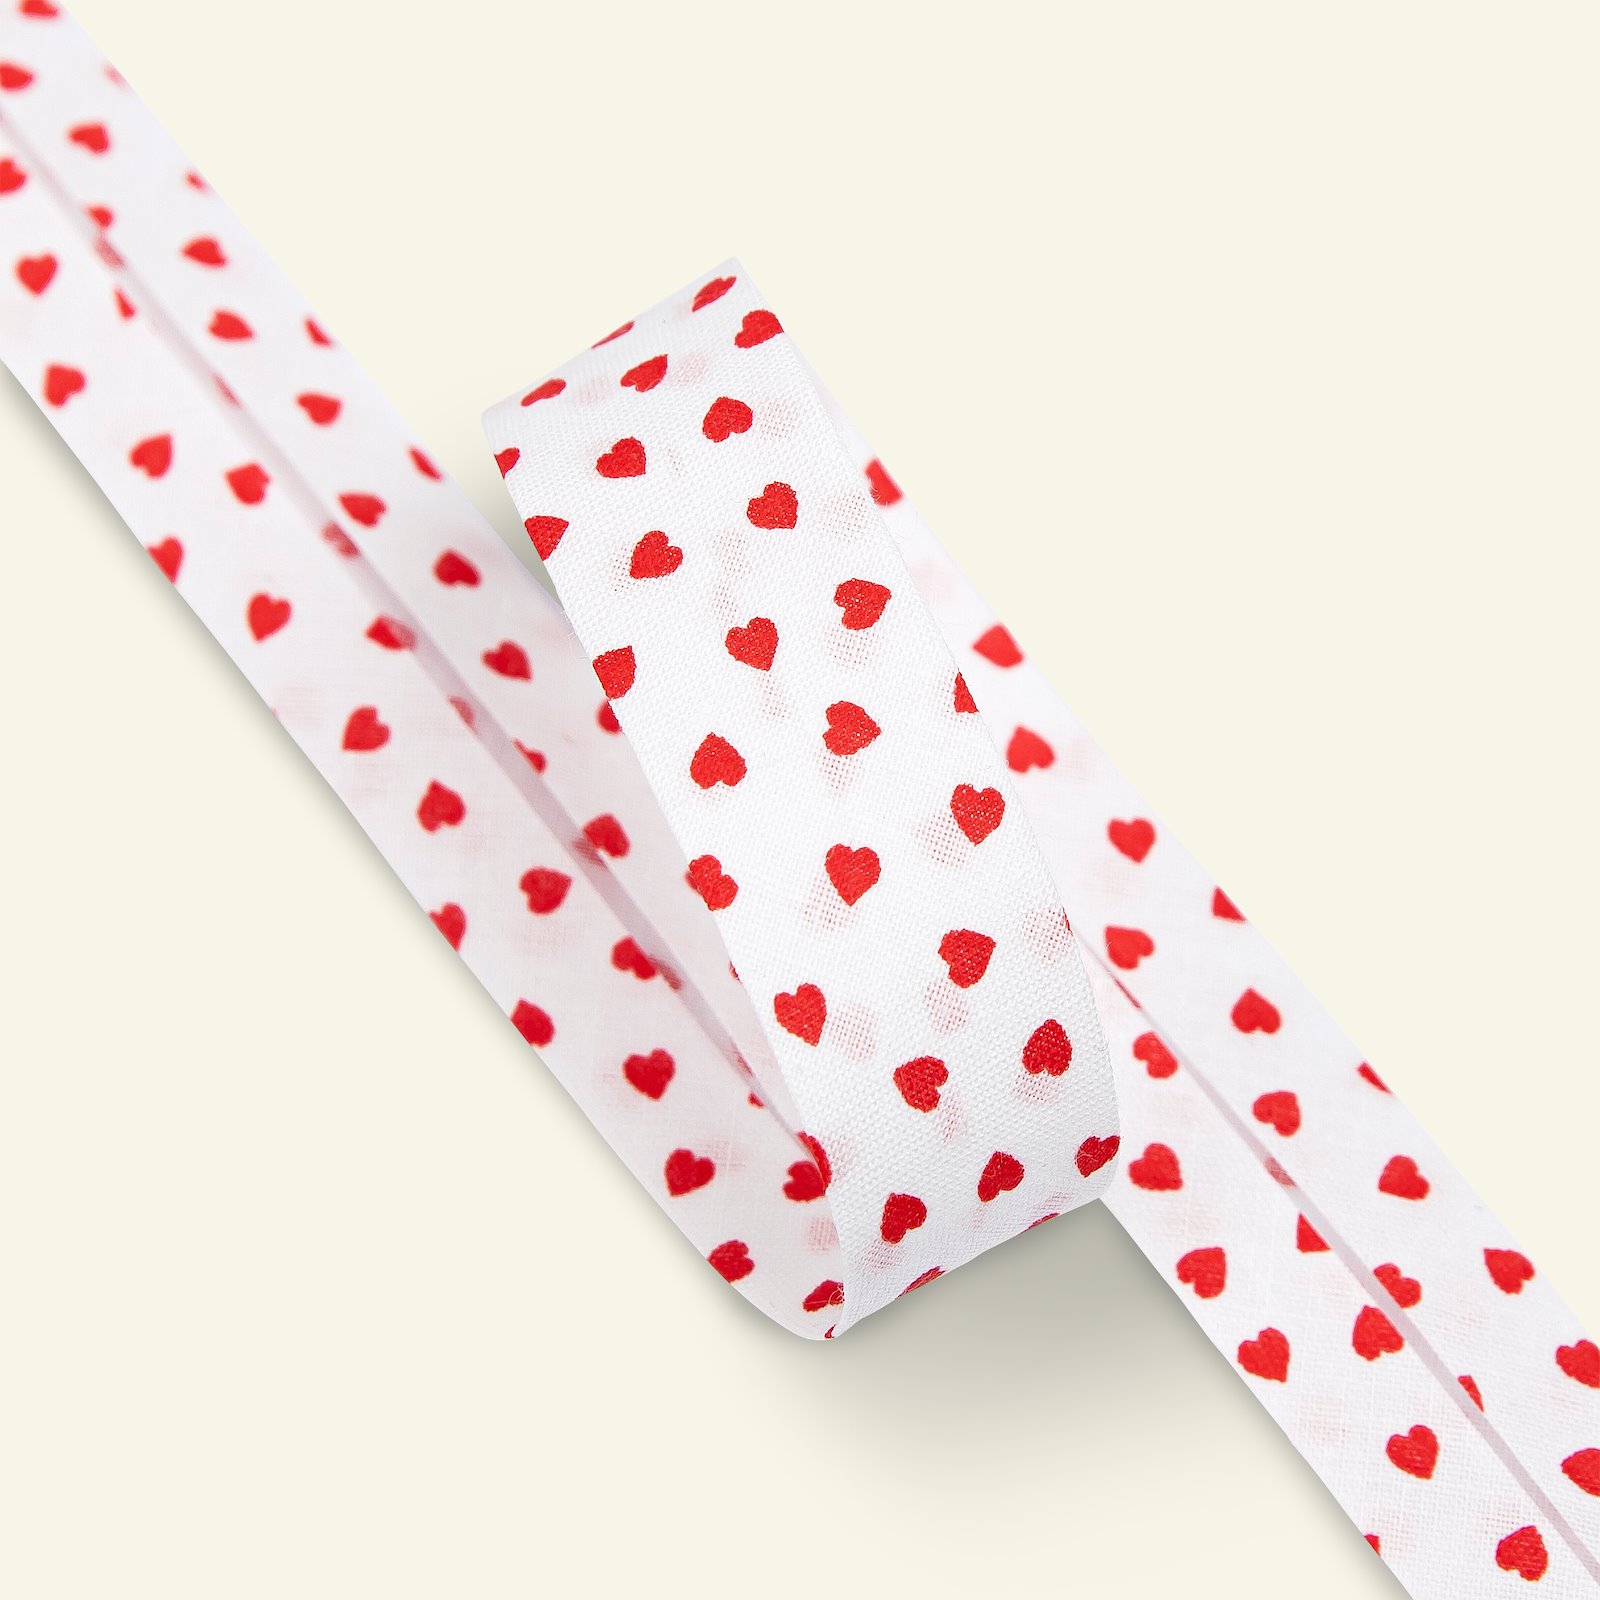 Bias tape hearts 20mm red/white 3m 64104_pack